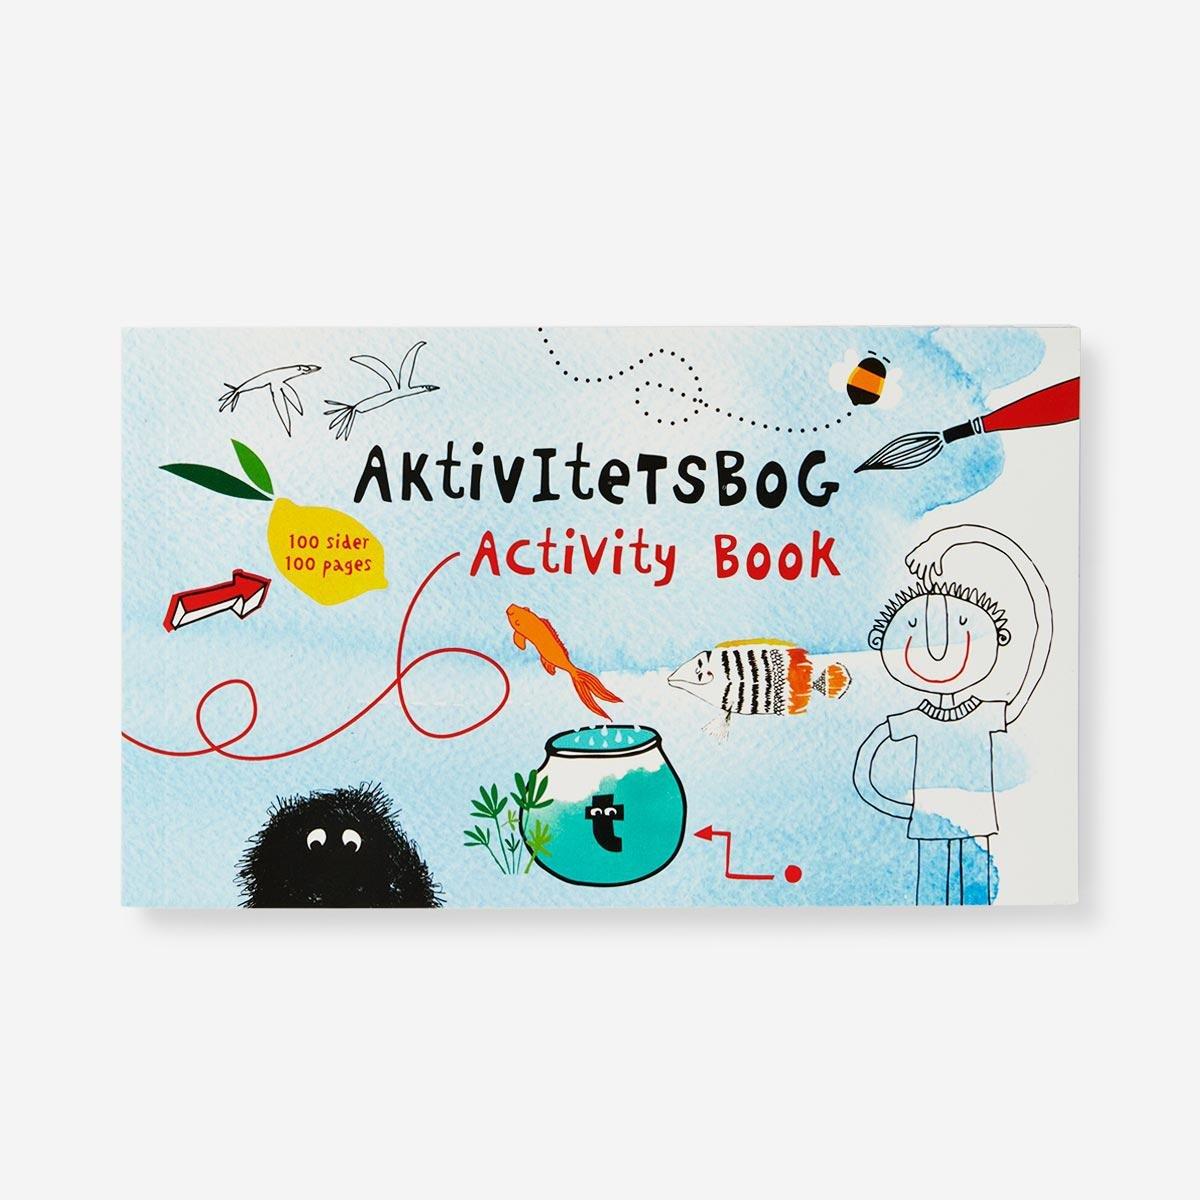 Activity book. 100 pages